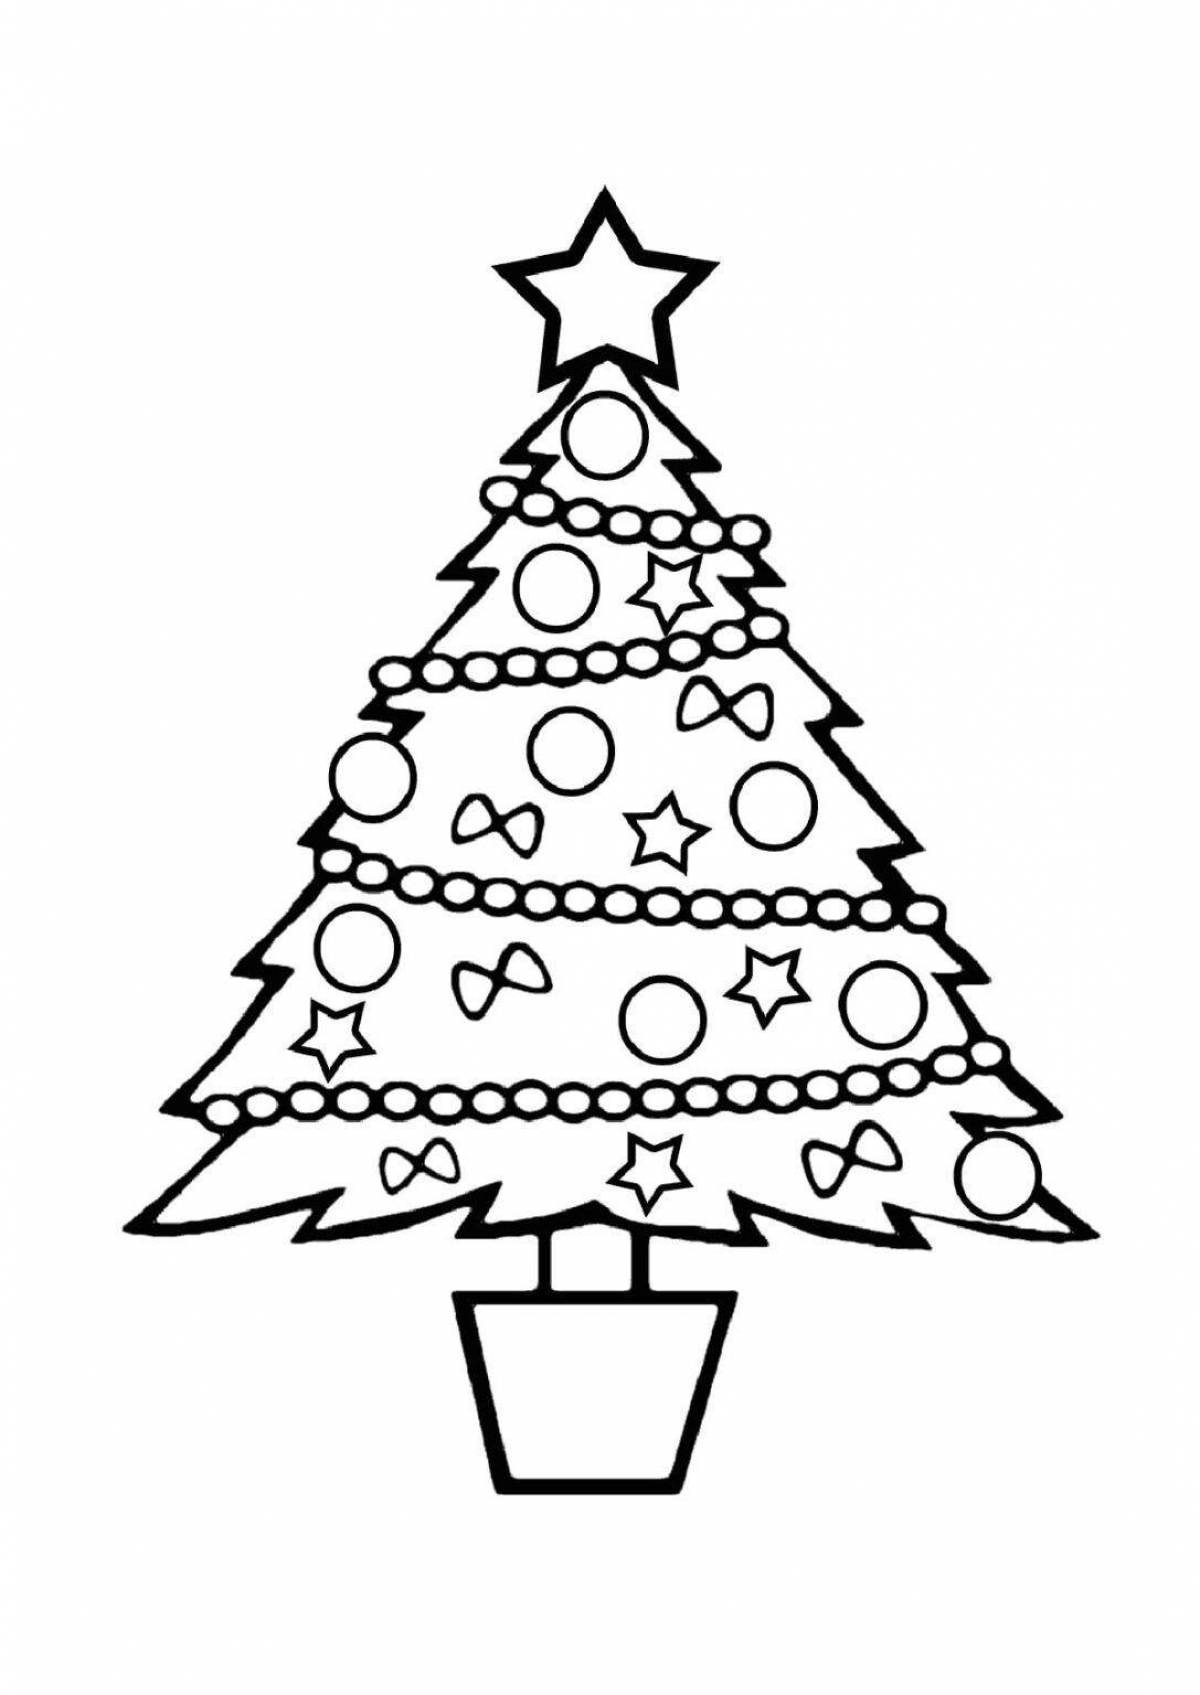 Great drawing of a Christmas tree for kids